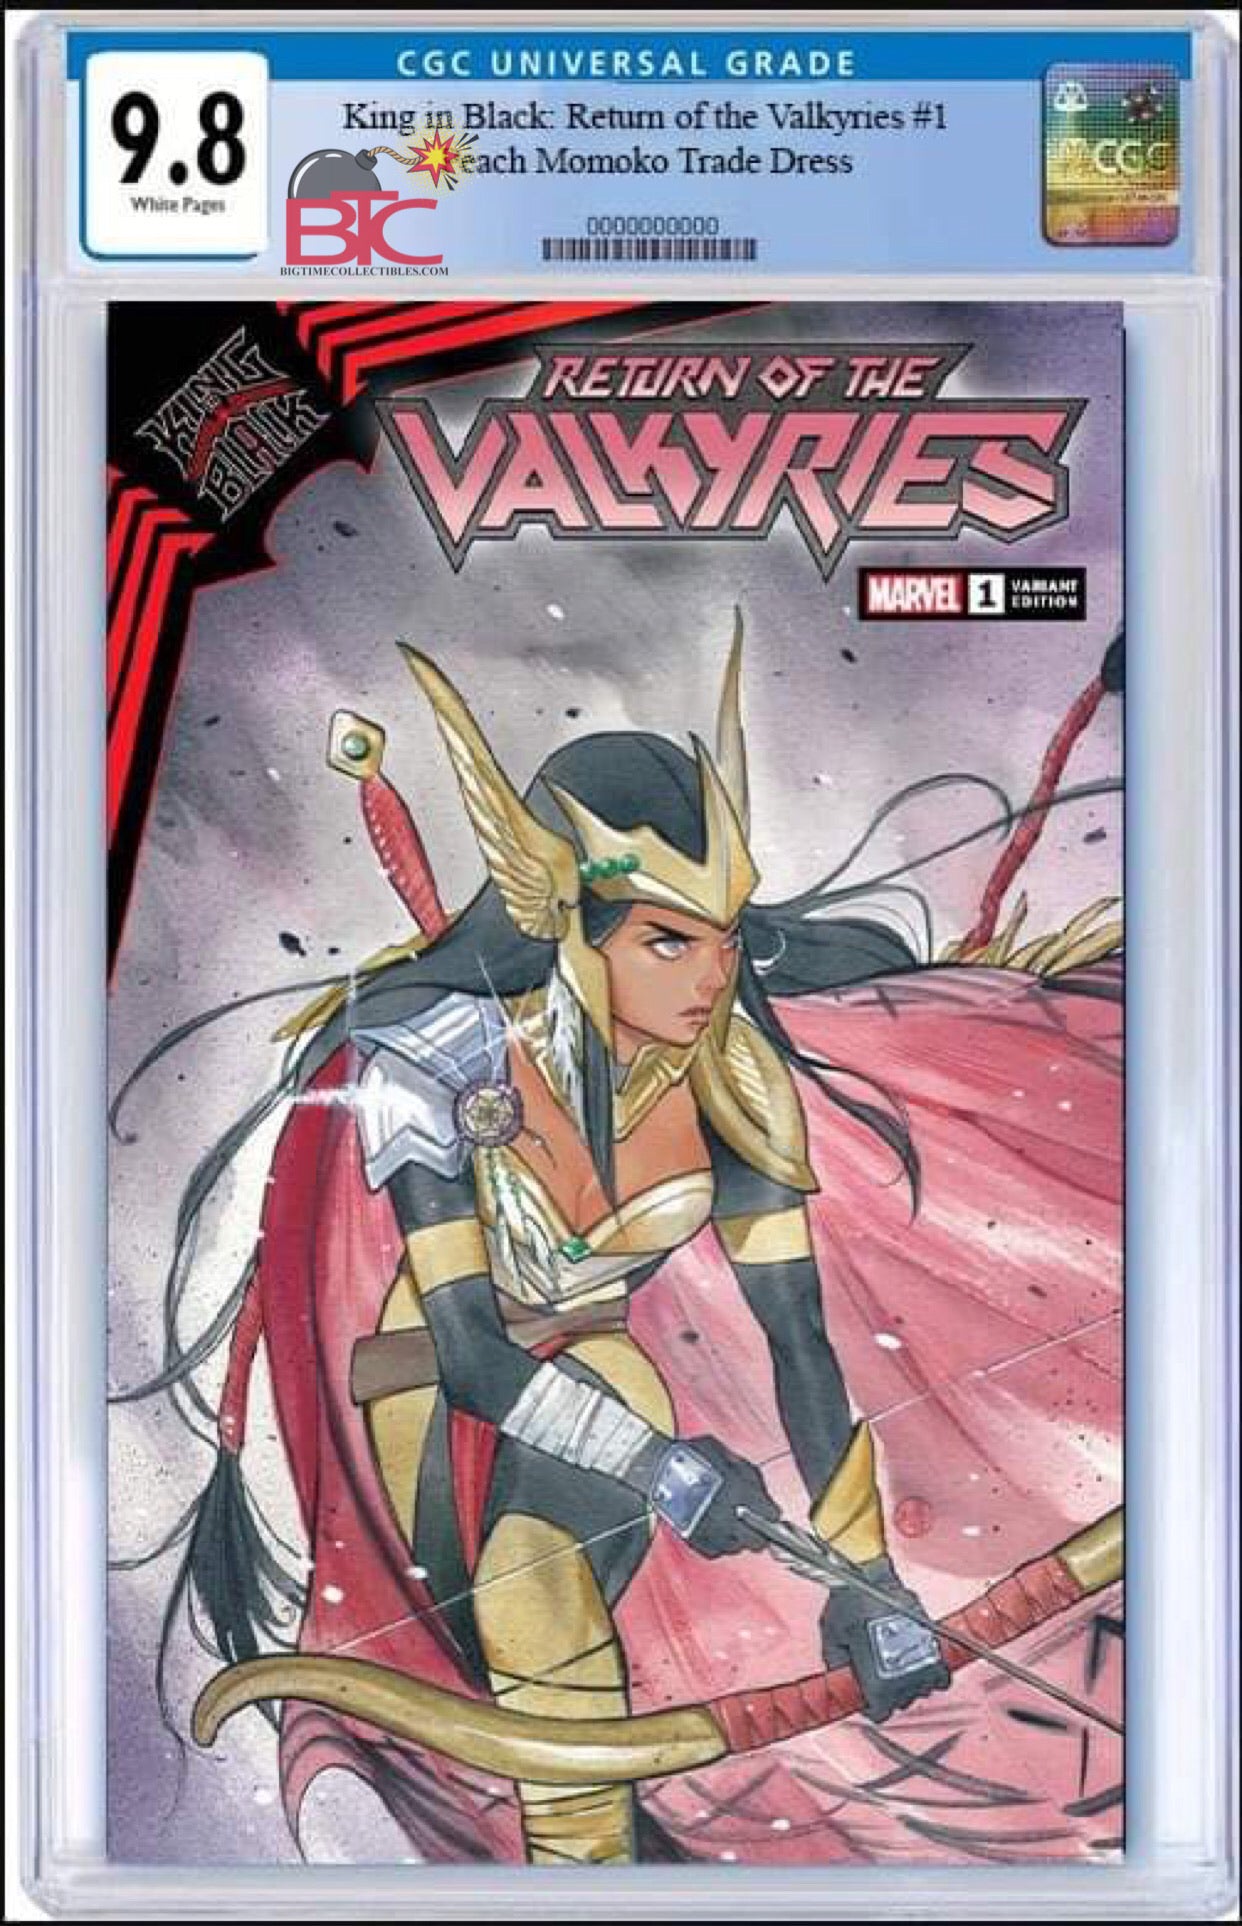 KING IN BLACK RETURN OF VALKYRIES #1 PEACH MOMOKO EXCLUSIVE VARIANT COVERS RAW & CGC GRADED OPTIONS